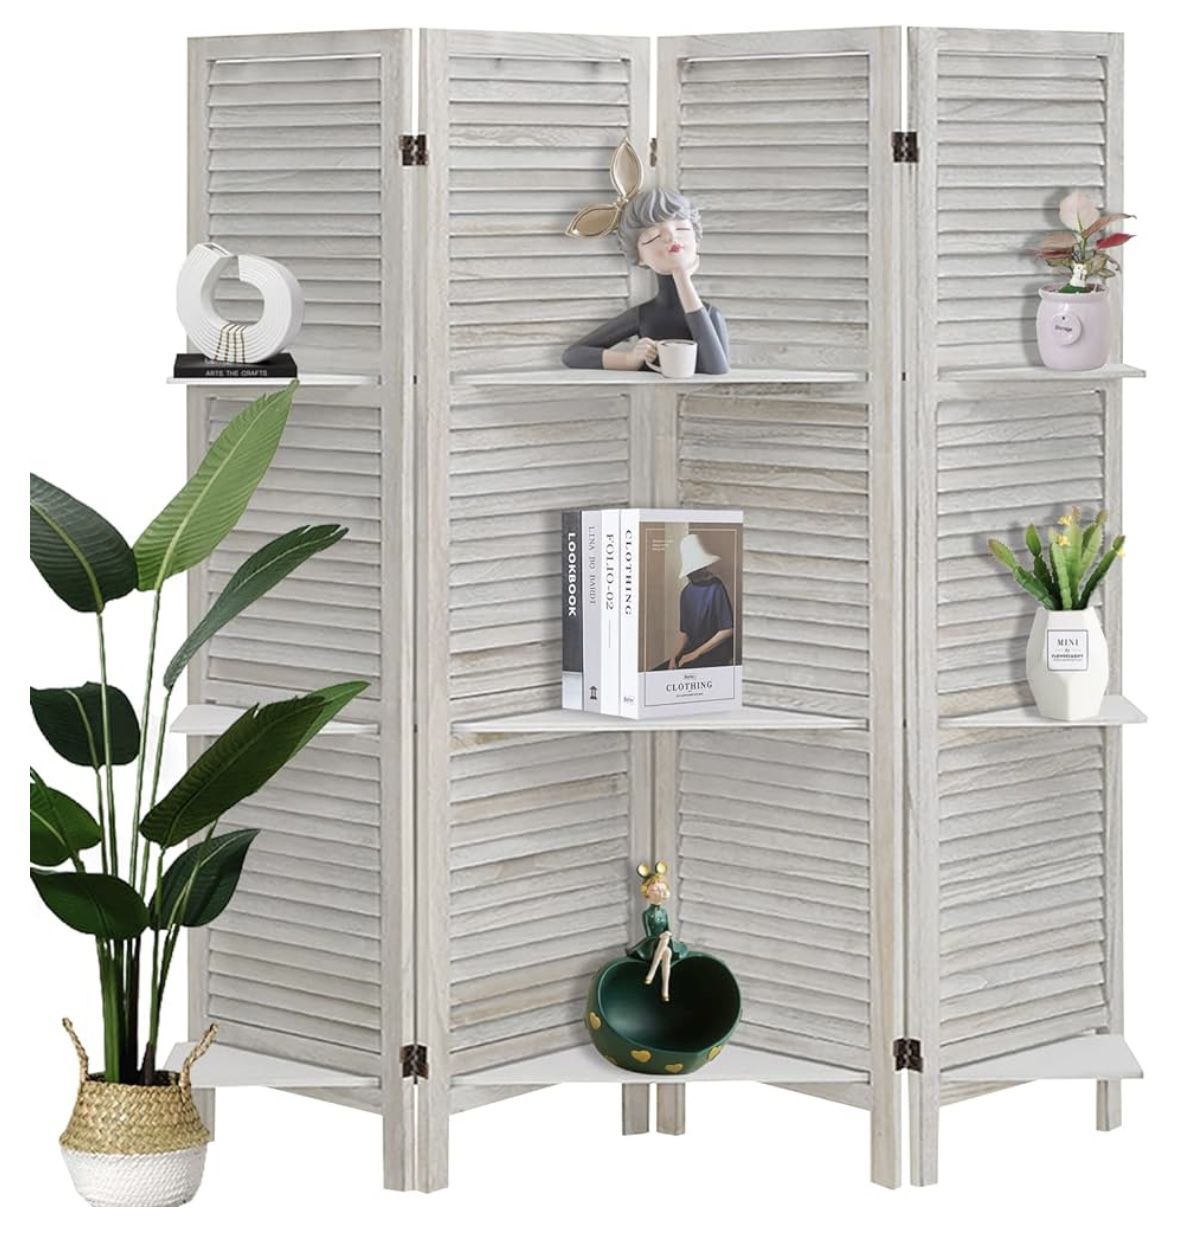 Wooden Folding Room Divider Panel Privacy Screens with Shelves